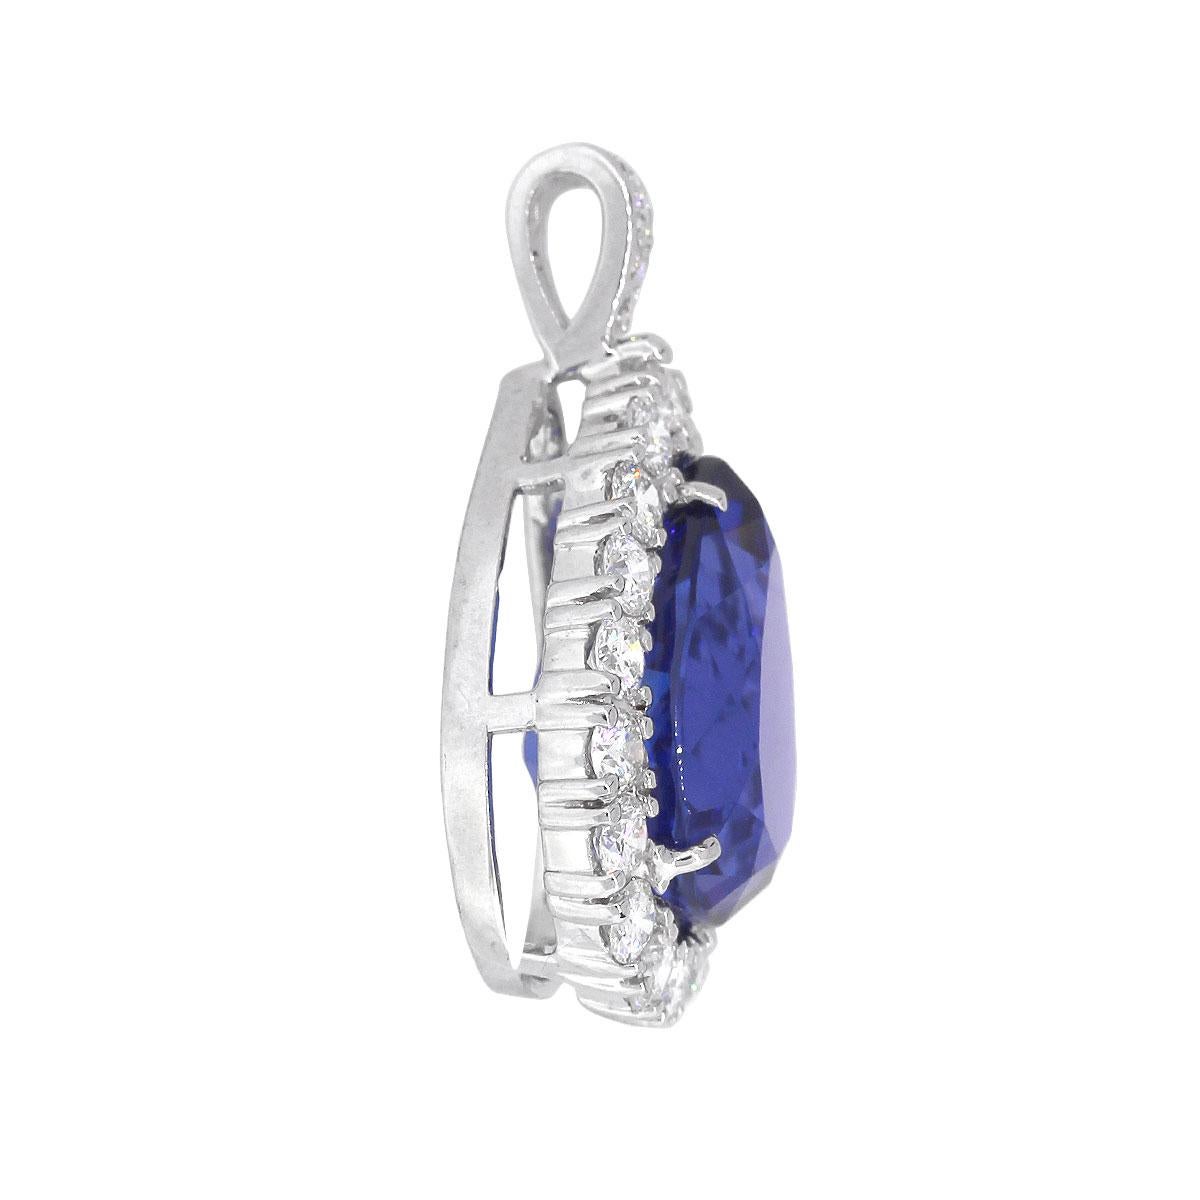 Material: 14k White Gold
Diamond Details: Approx. 2.45ct of round brilliant diamonds. Diamonds are G/H in color and SI in clarity.
Gemstone Details: Approx. 17ct Pear Shape Tanzanite gemstone.
Pendant Measurements: 0.82″ x 0.45″ x 1.35″
Item Weight: